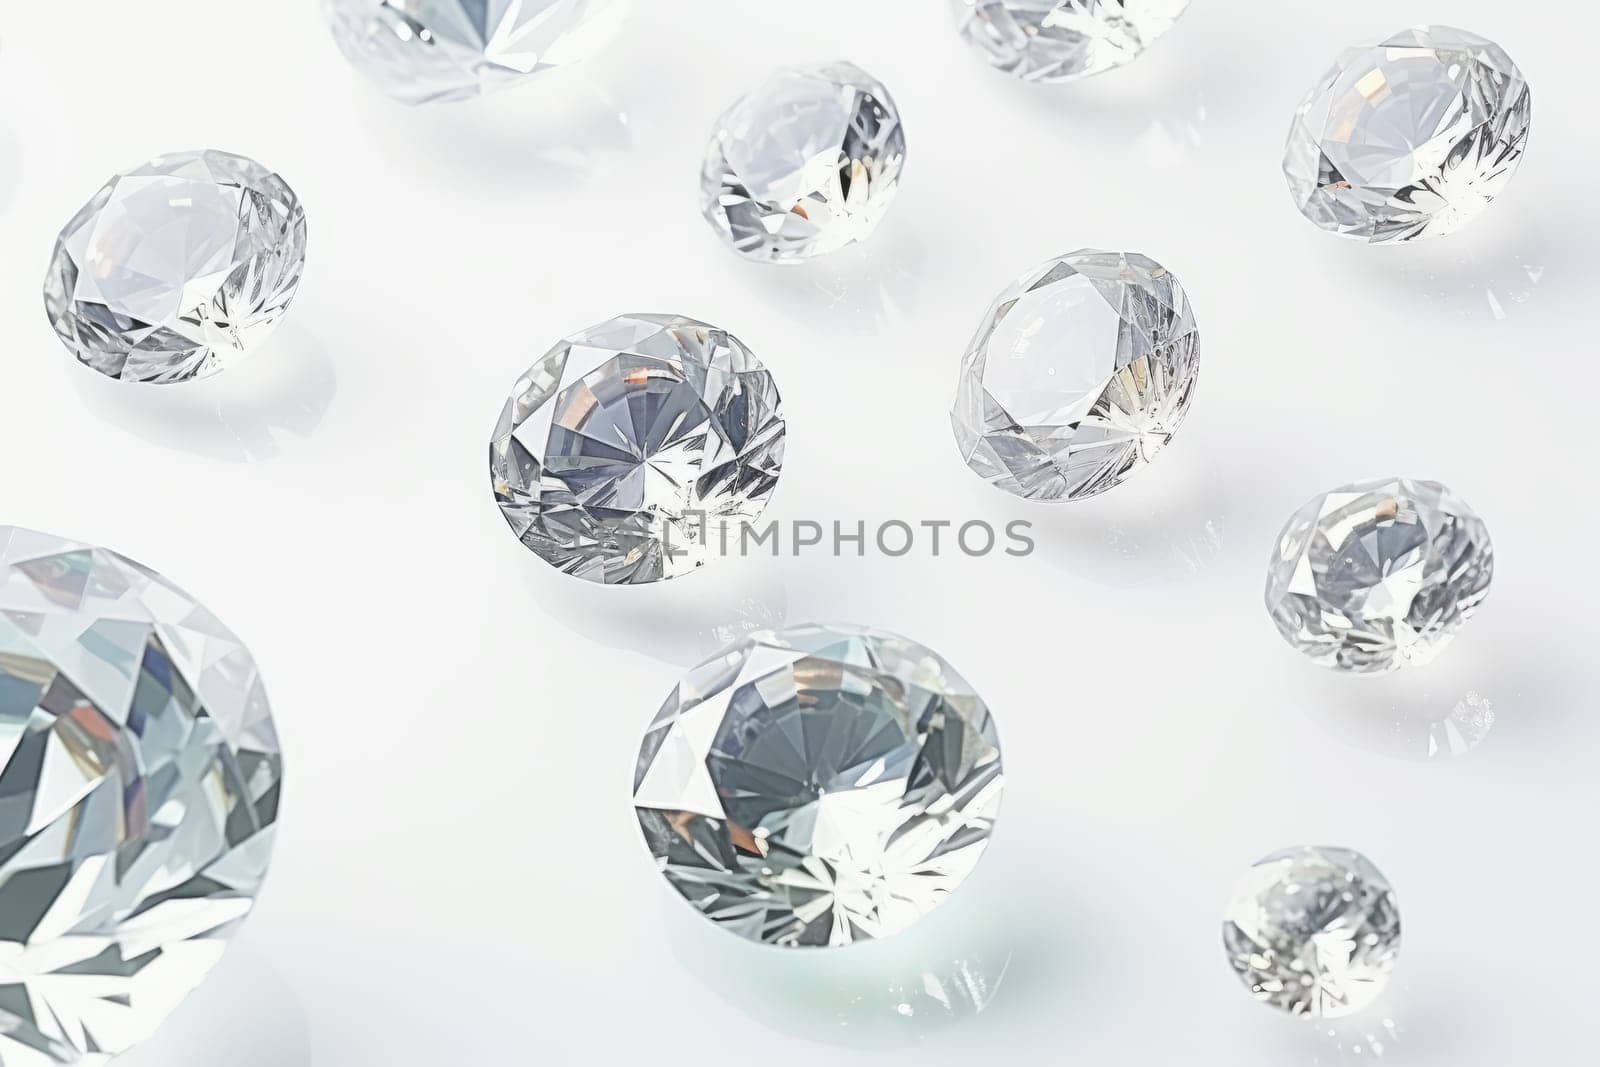 Diamonds gems of different cuts and sizes on white background